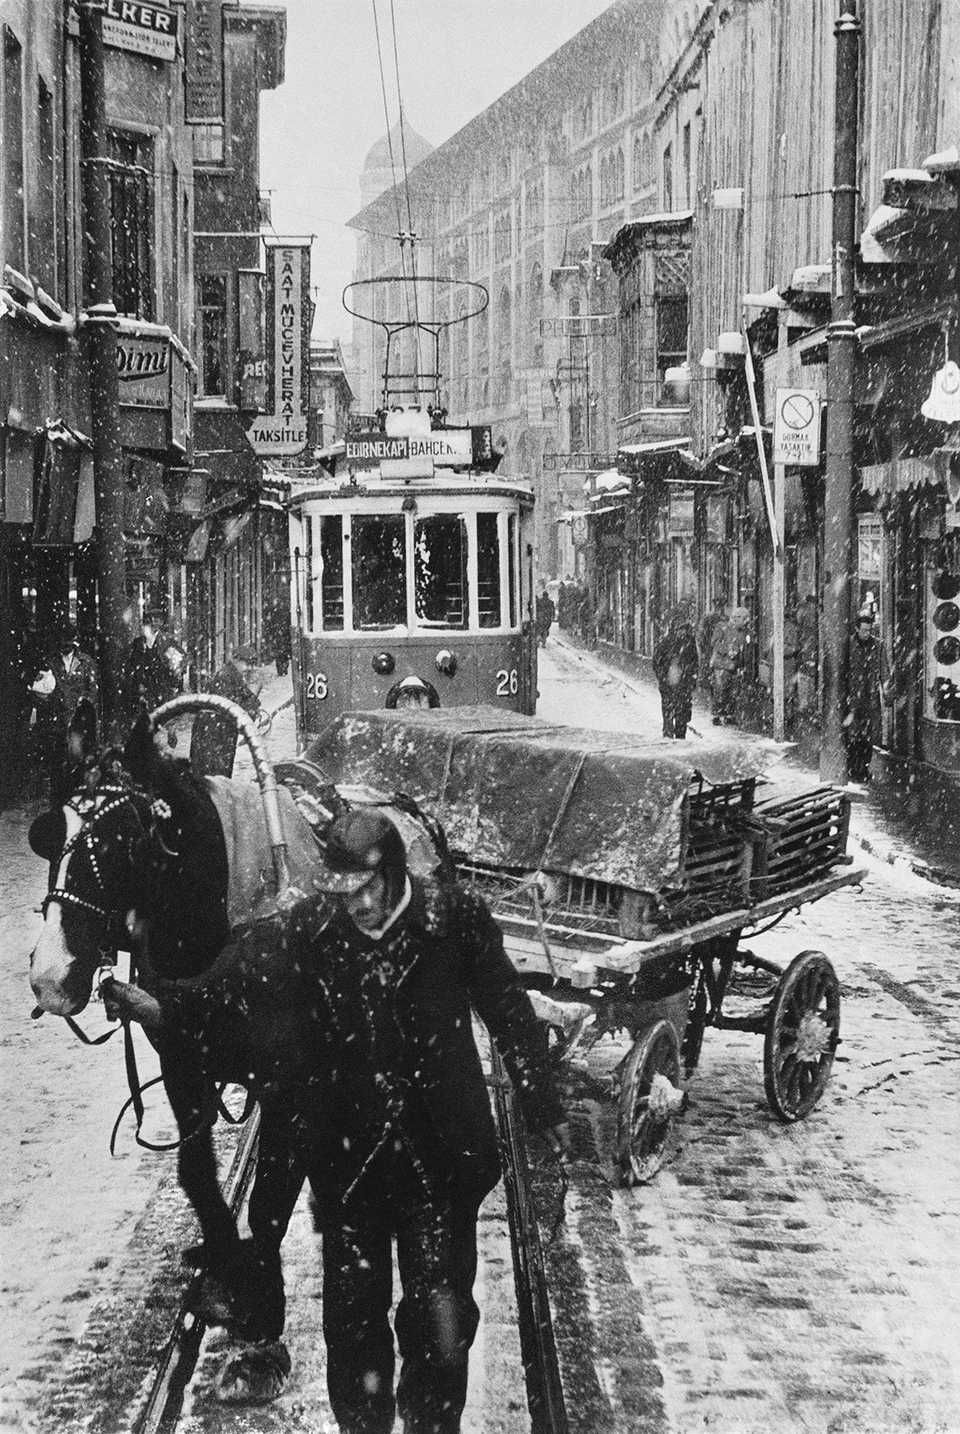 A horse cart and a tram in Sirkeci on a winter’s day, 1956.